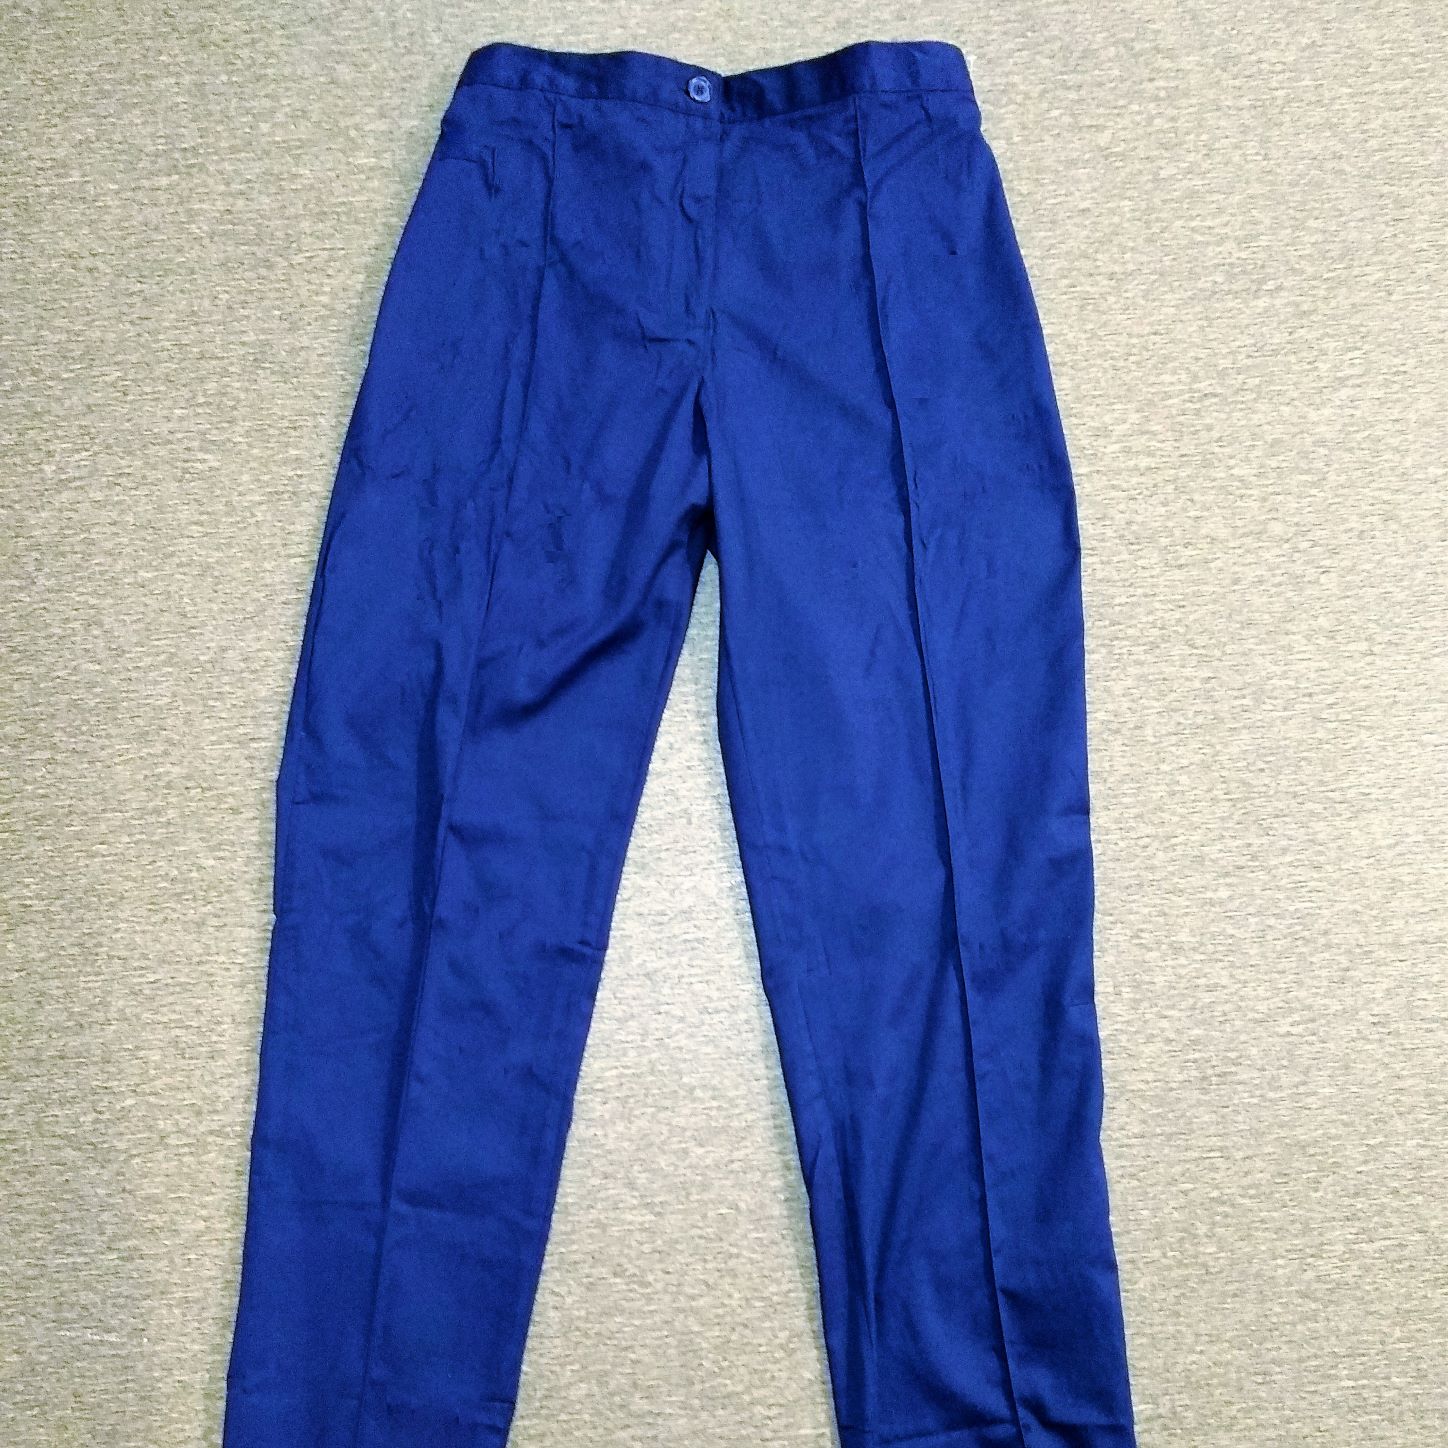 Nursing and Physiotherapy Placement trousers